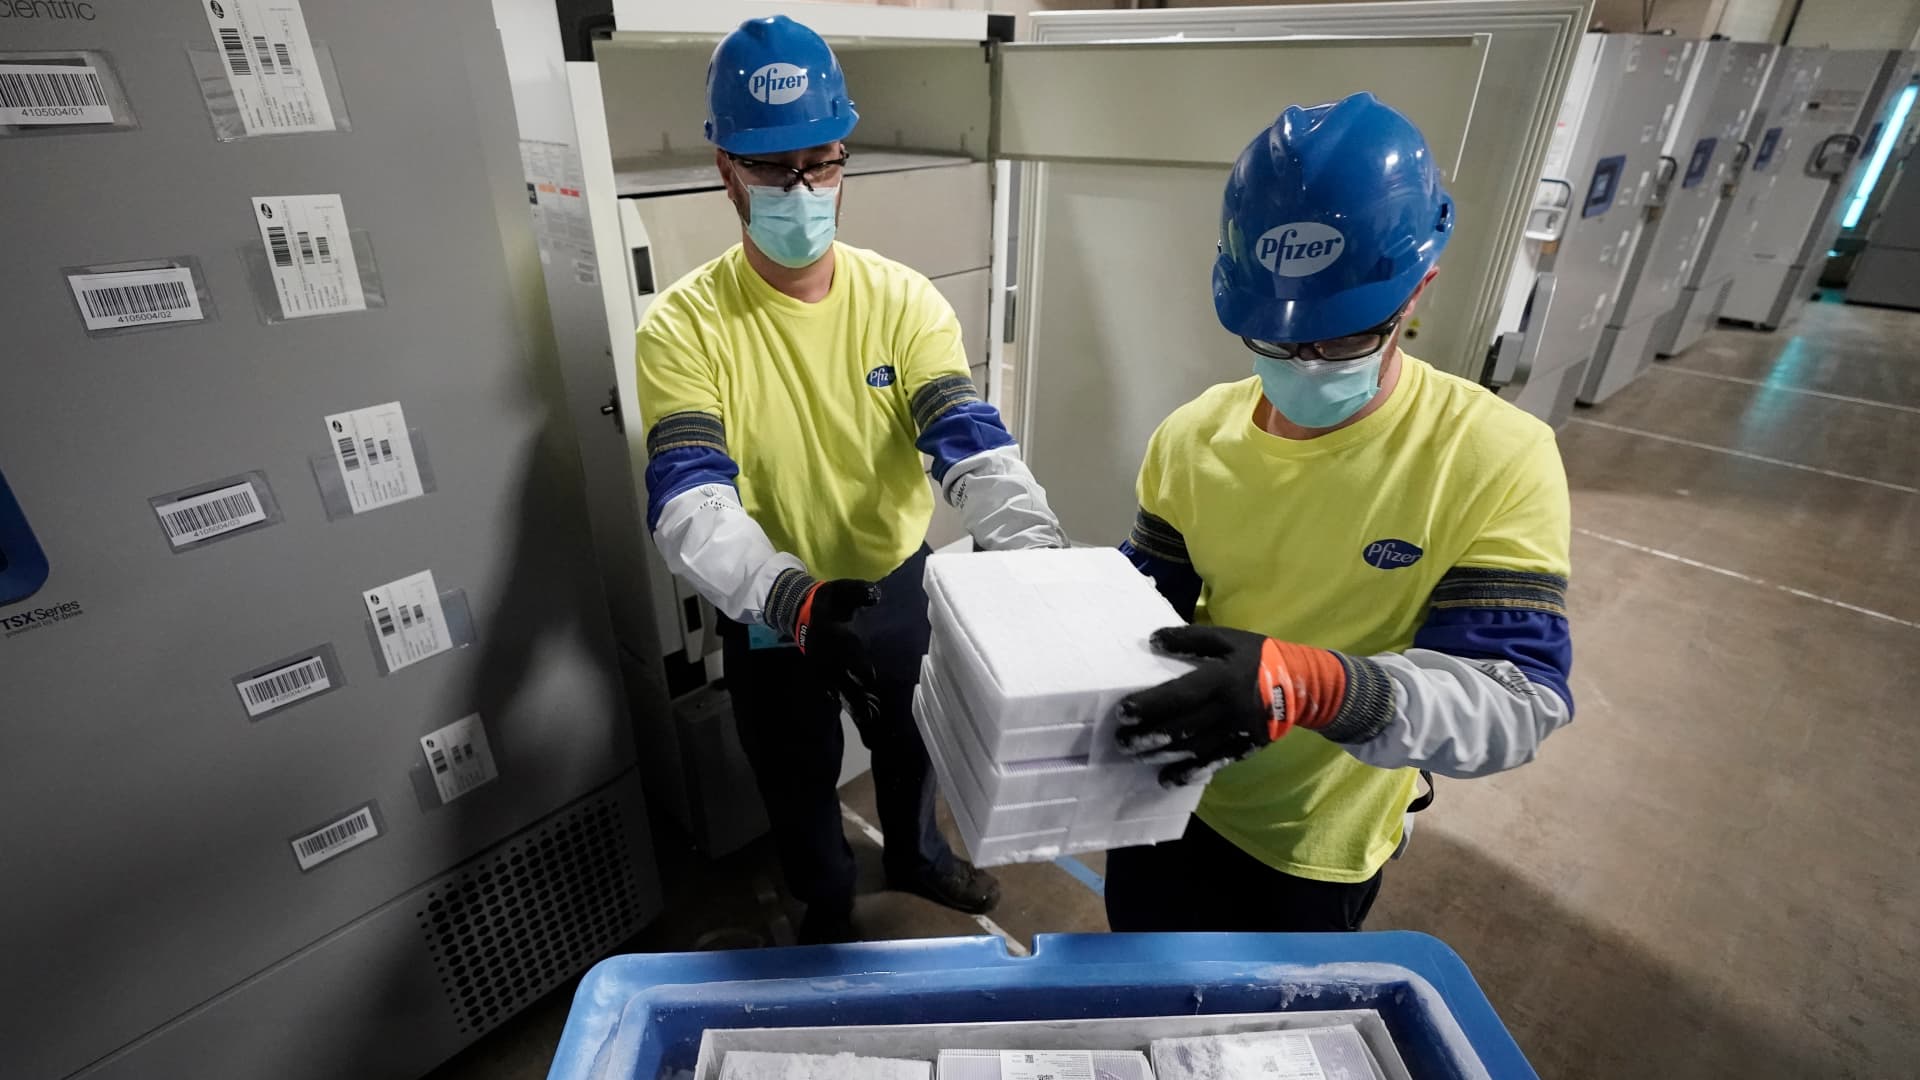 Boxes containing the Pfizer-BioNTech Covid vaccine are prepared to be shipped at the Pfizer Global Supply Kalamazoo manufacturing plant on December 13, 2020 in Portage, Michigan.